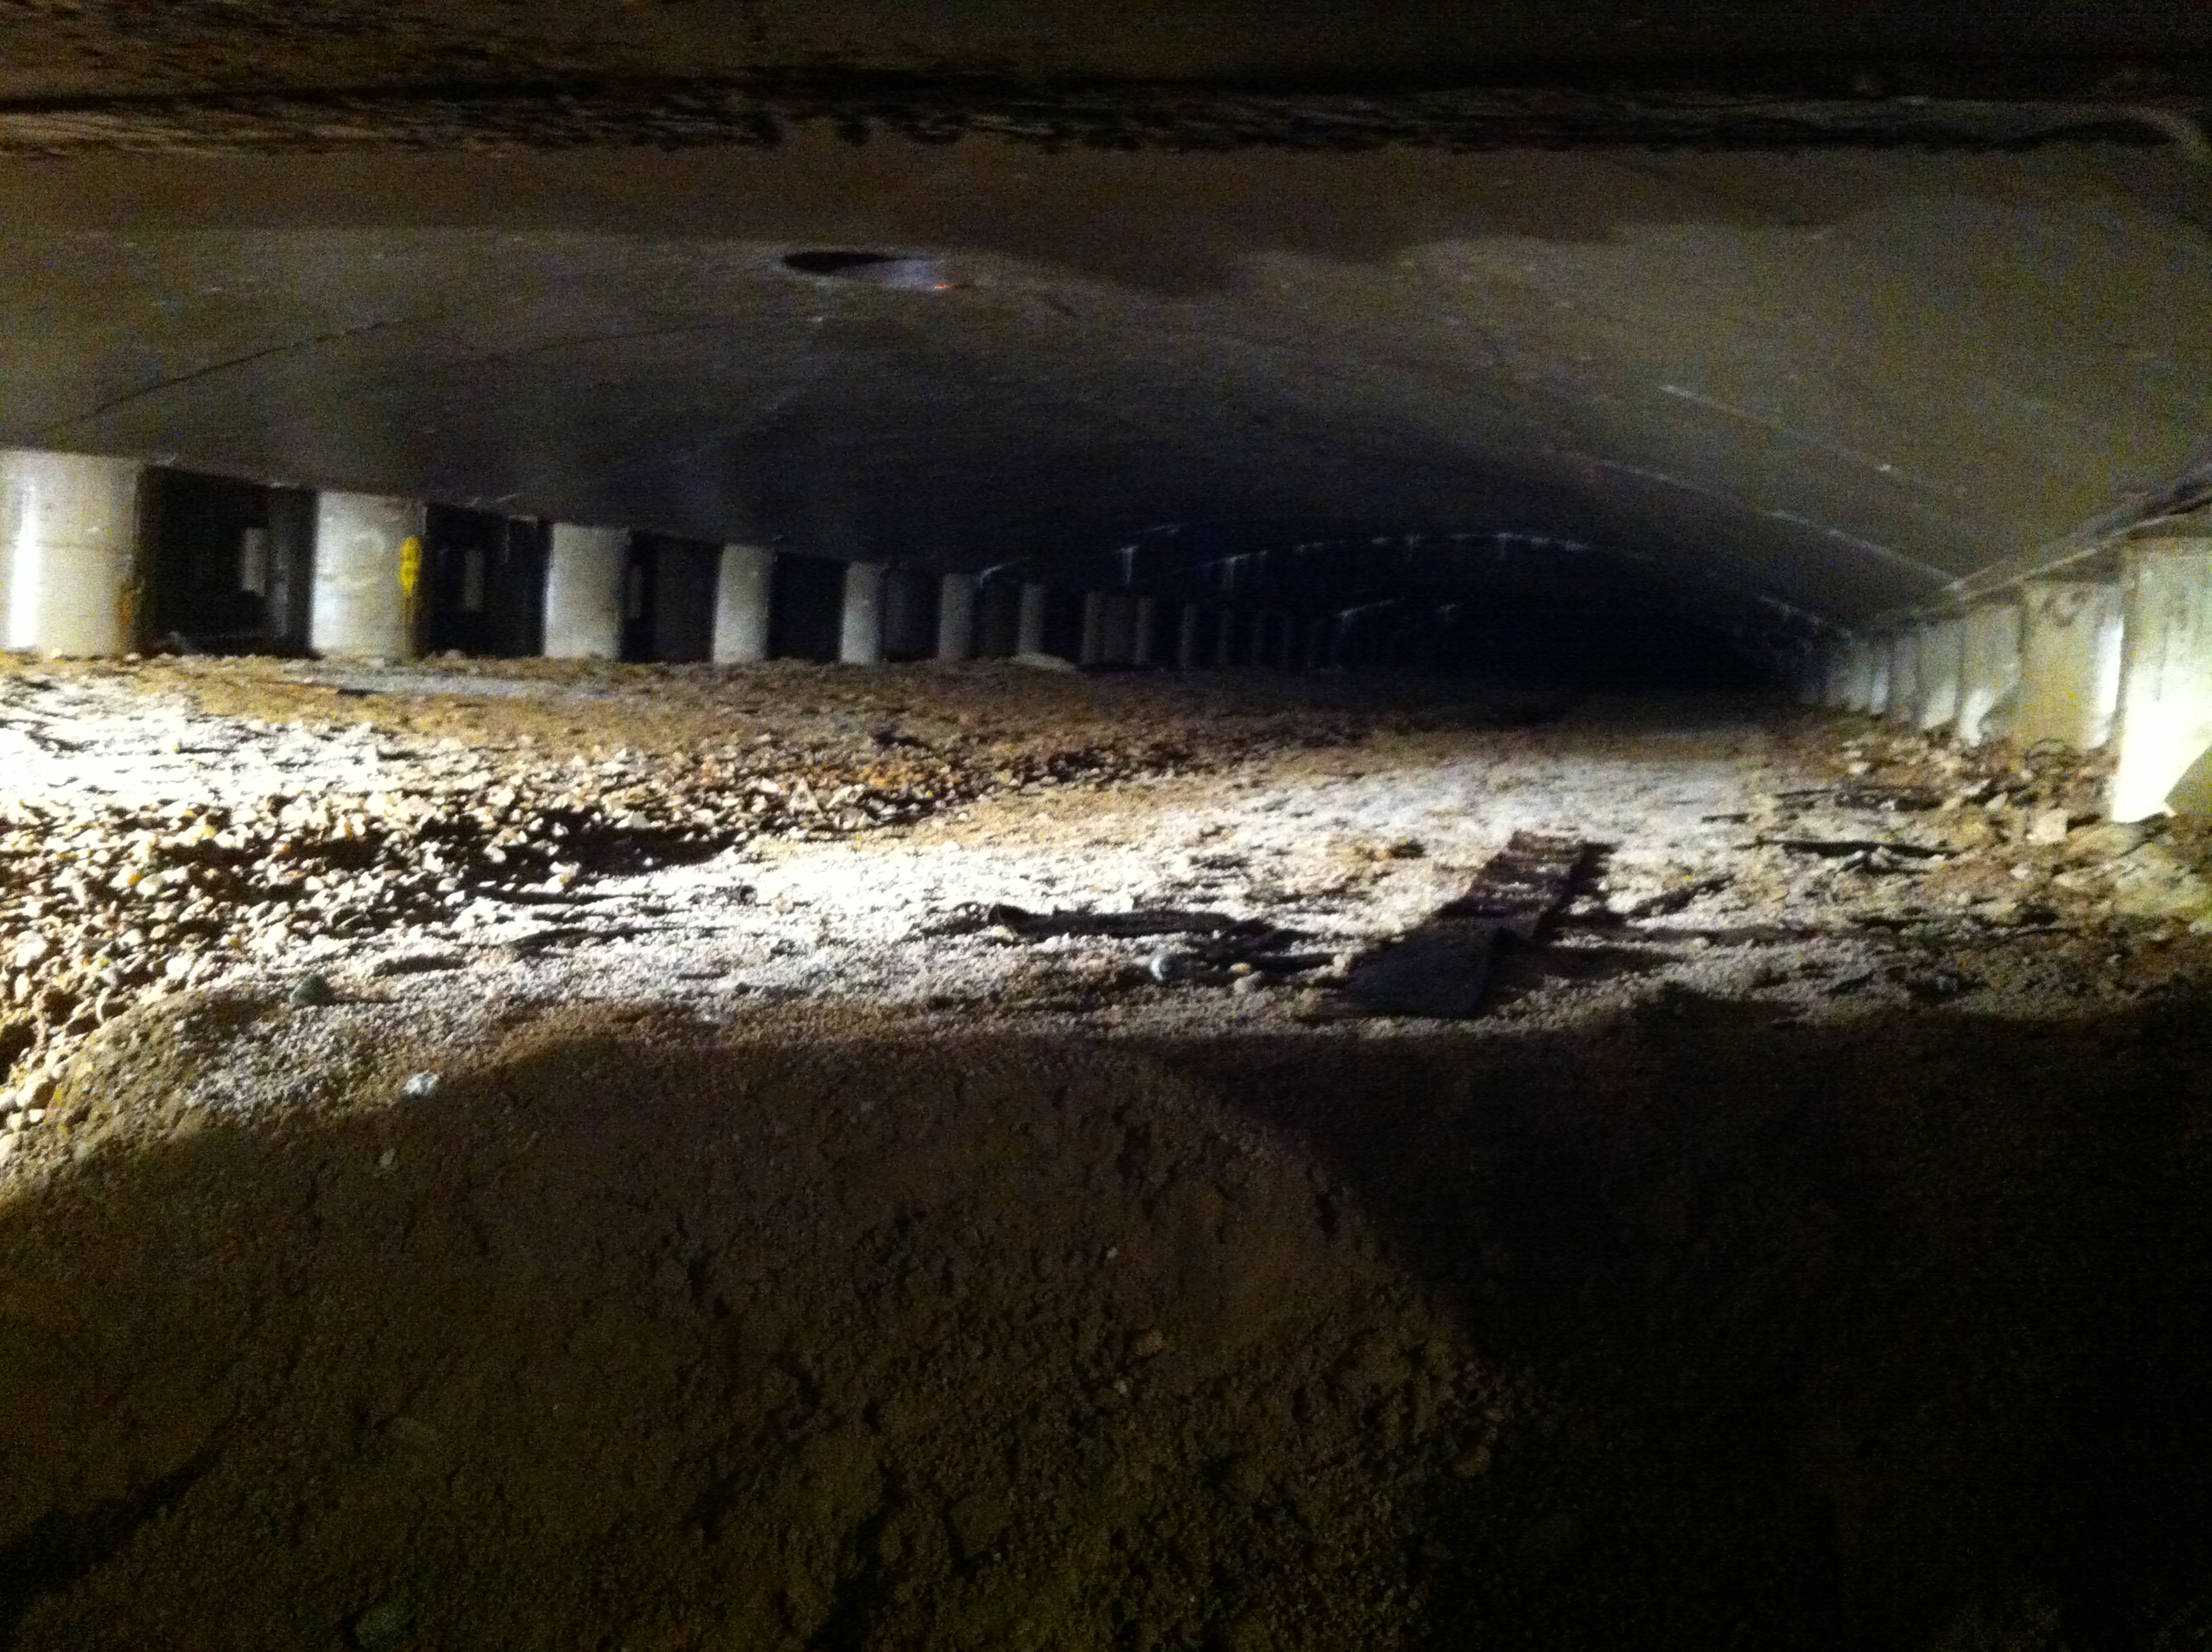 Underneath one of Hillcrest’s two old, concrete, treated water storage tanks in south Denver, which dated to the 1960s, before they were removed and replaced as part of a multi-year capital improvement program.